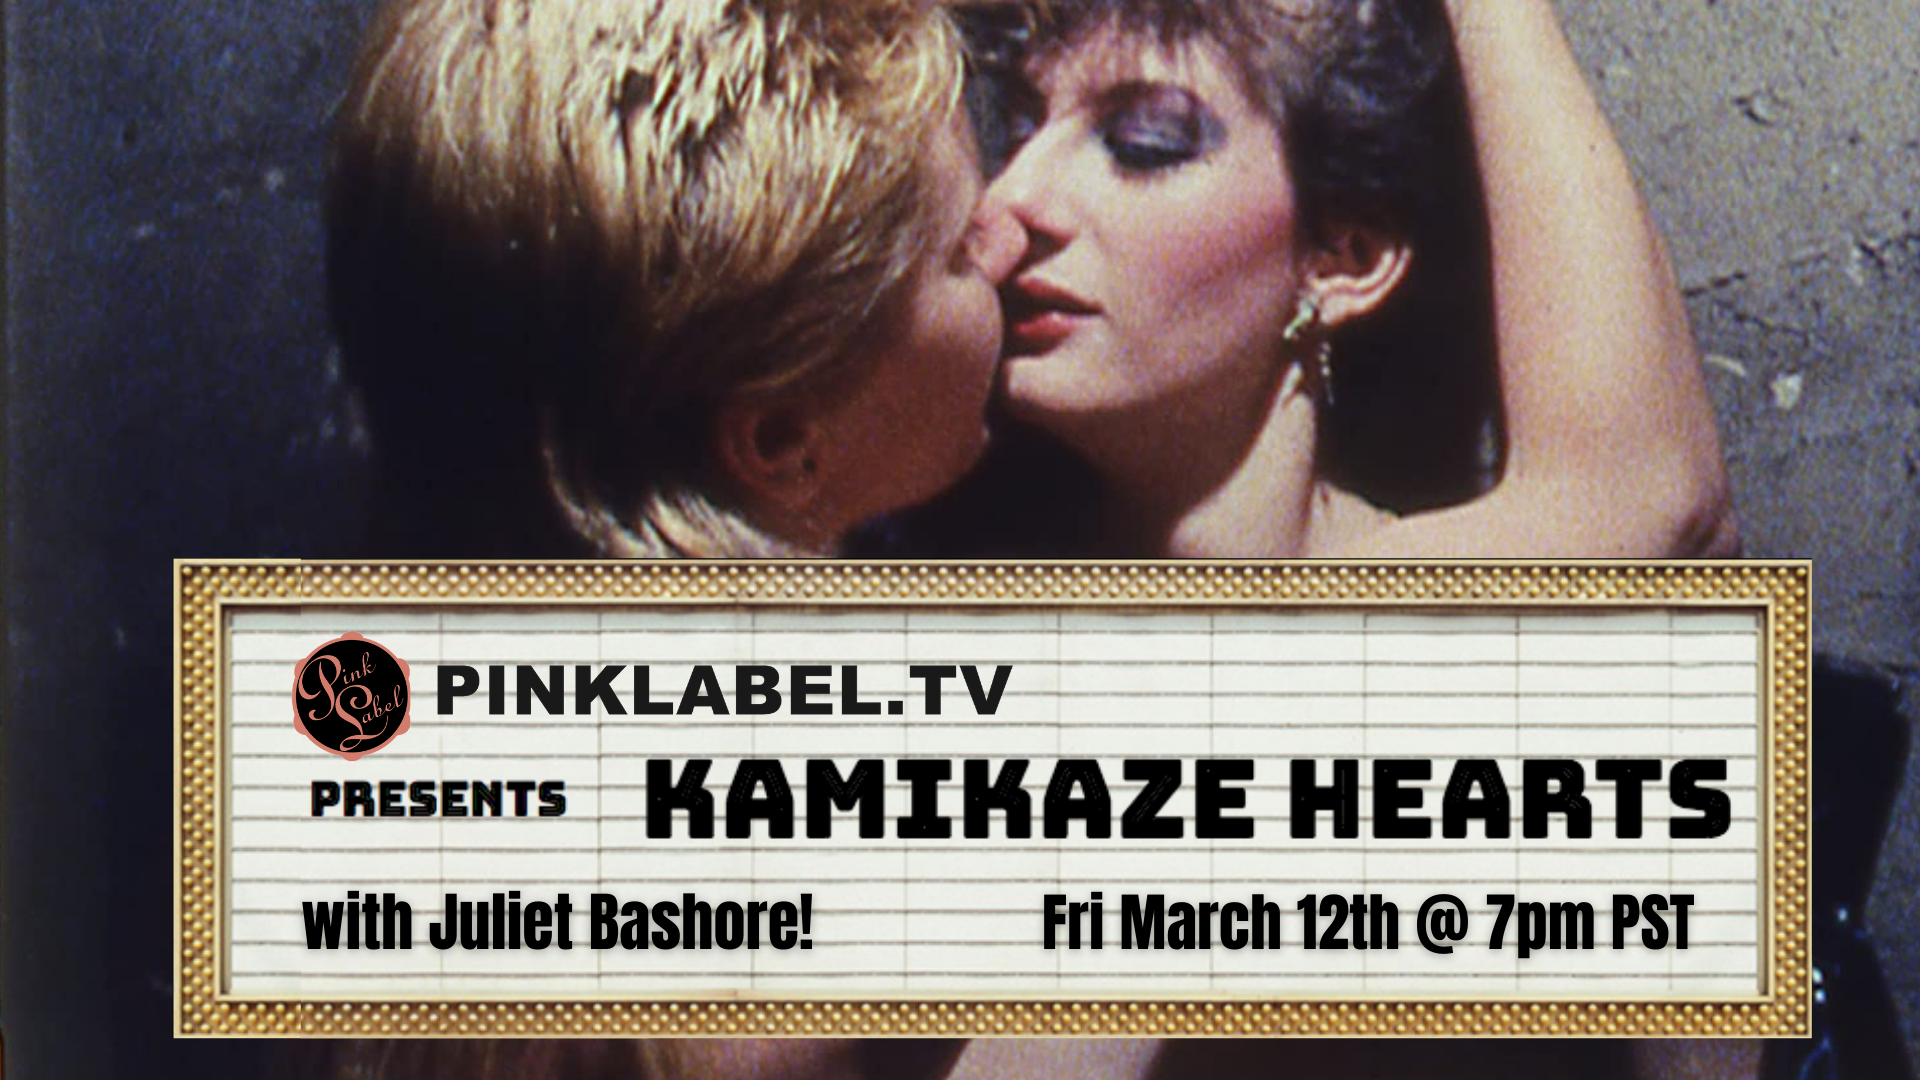 Kamikaze Hearts screens on March 12th